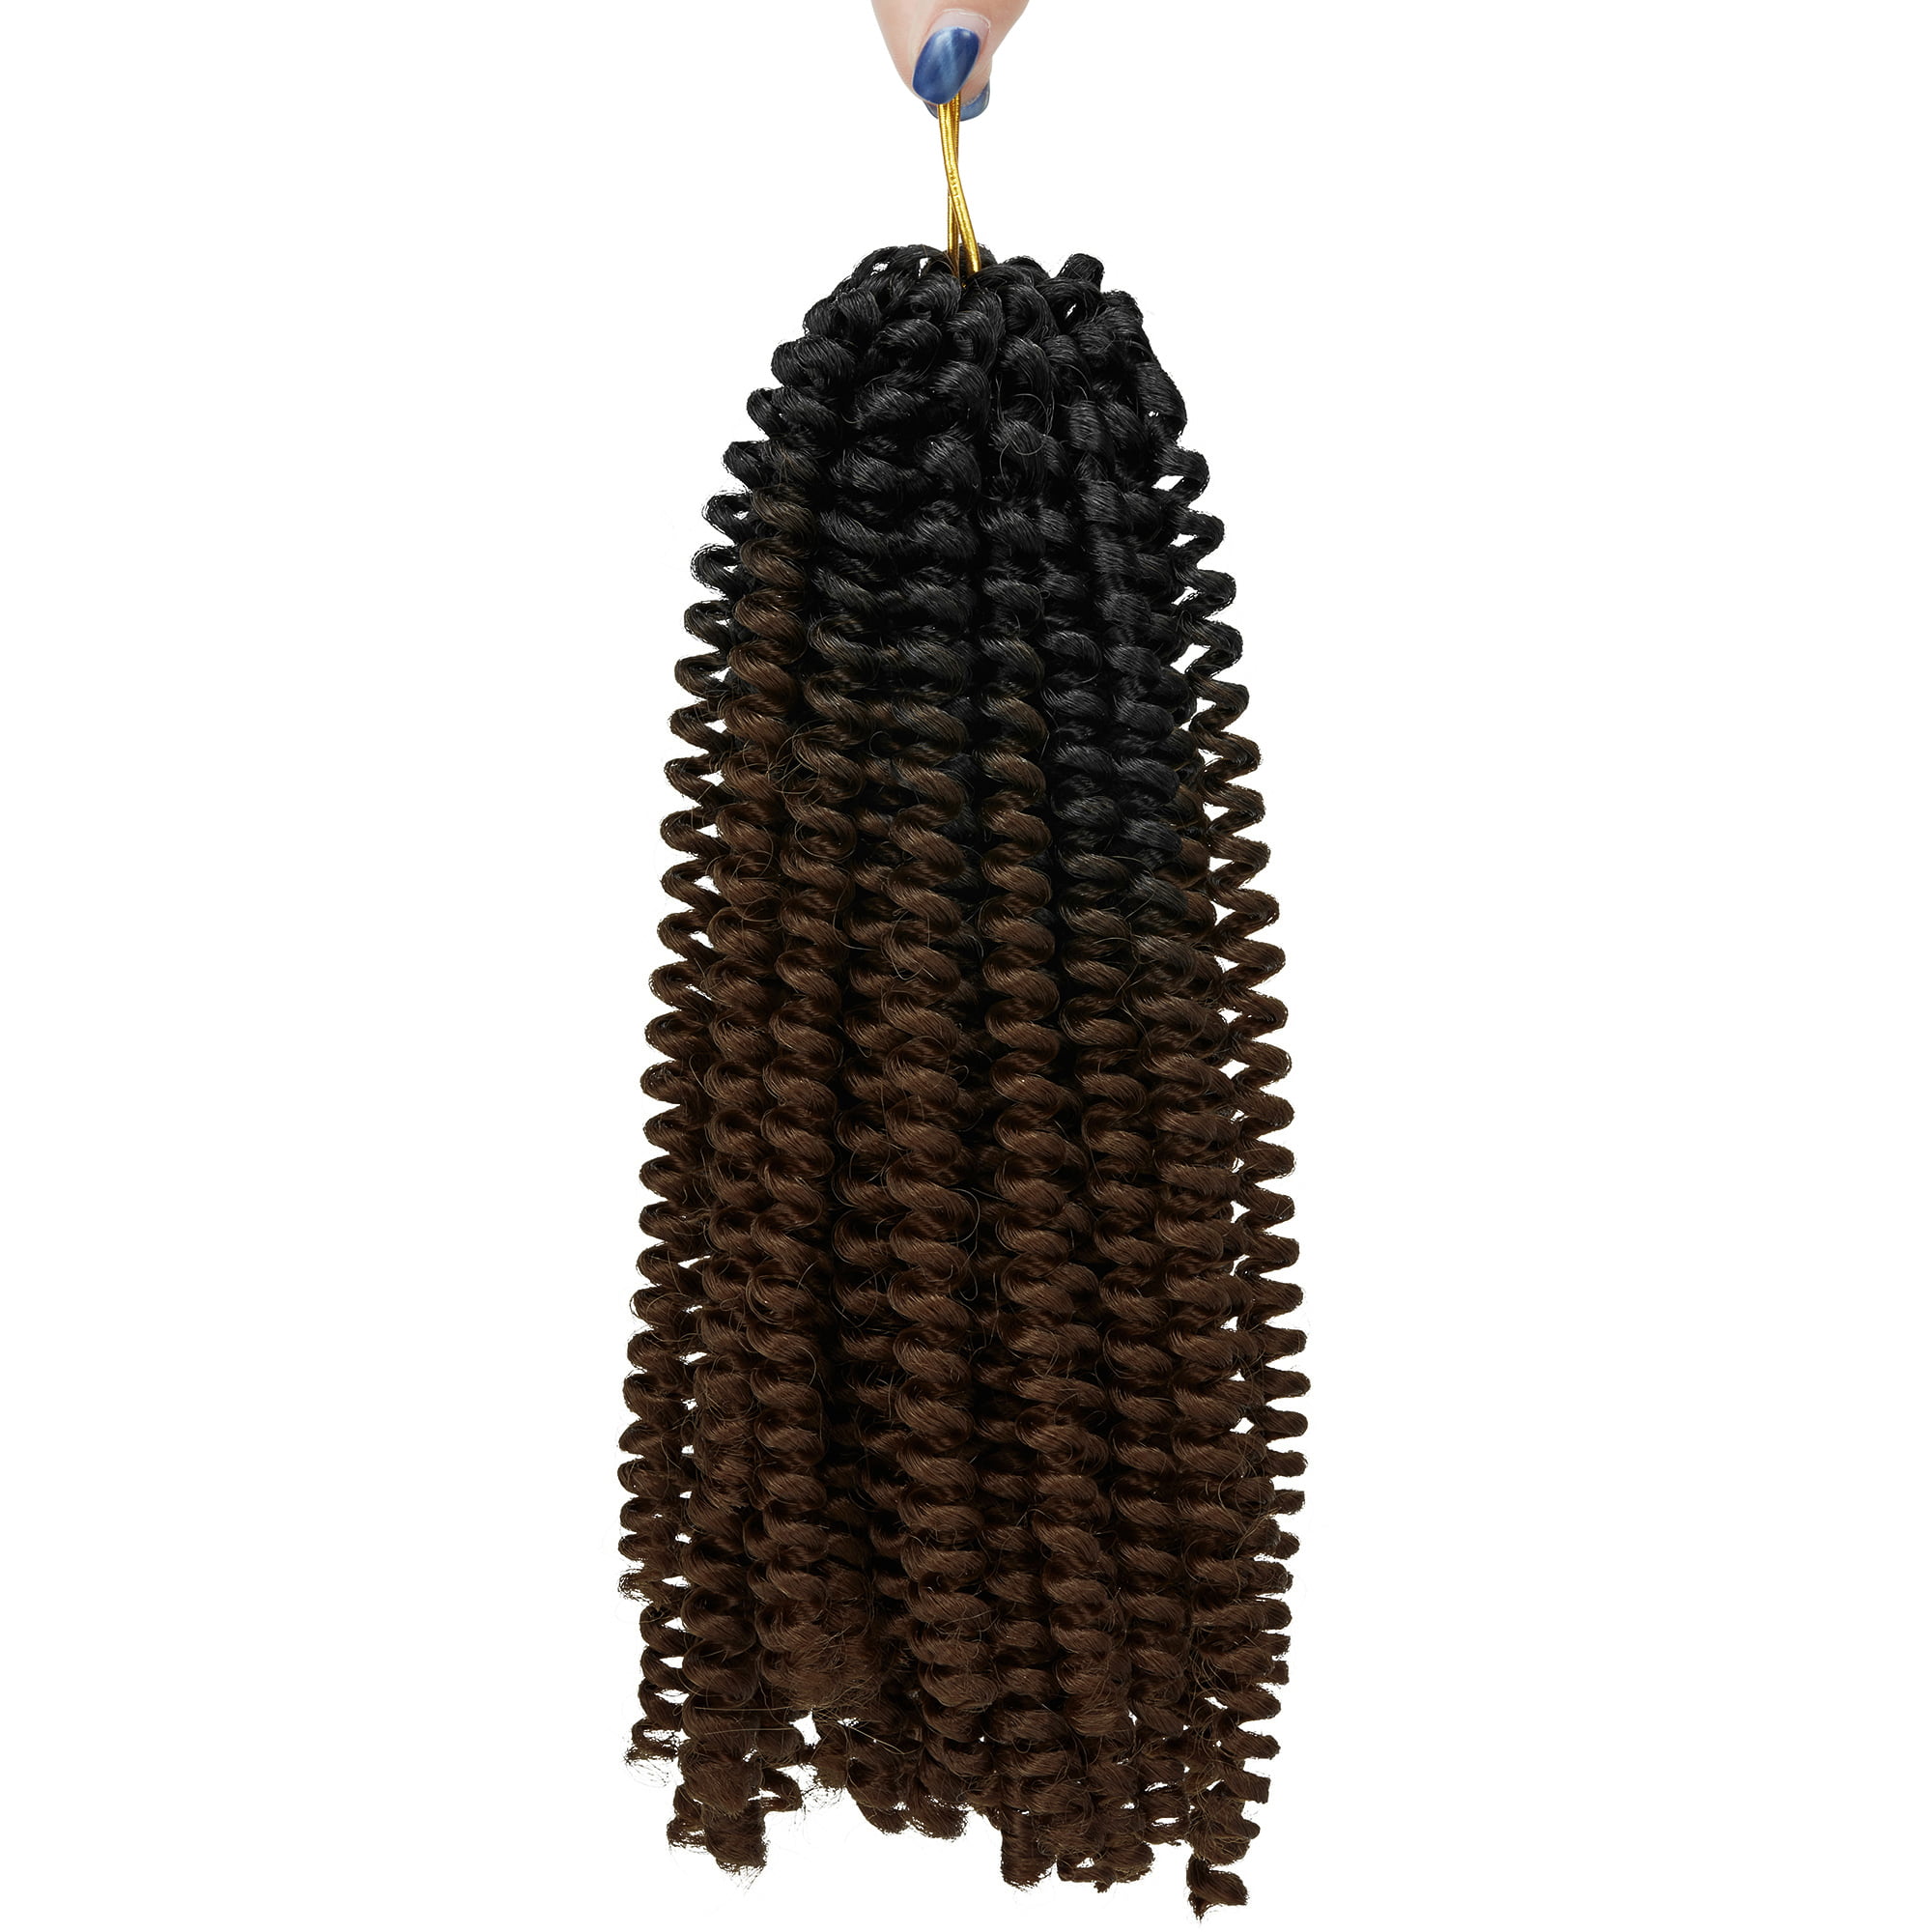 8 Inch Spring Twist Hair,Synthetic Braiding Hair Extensions for Woman ...